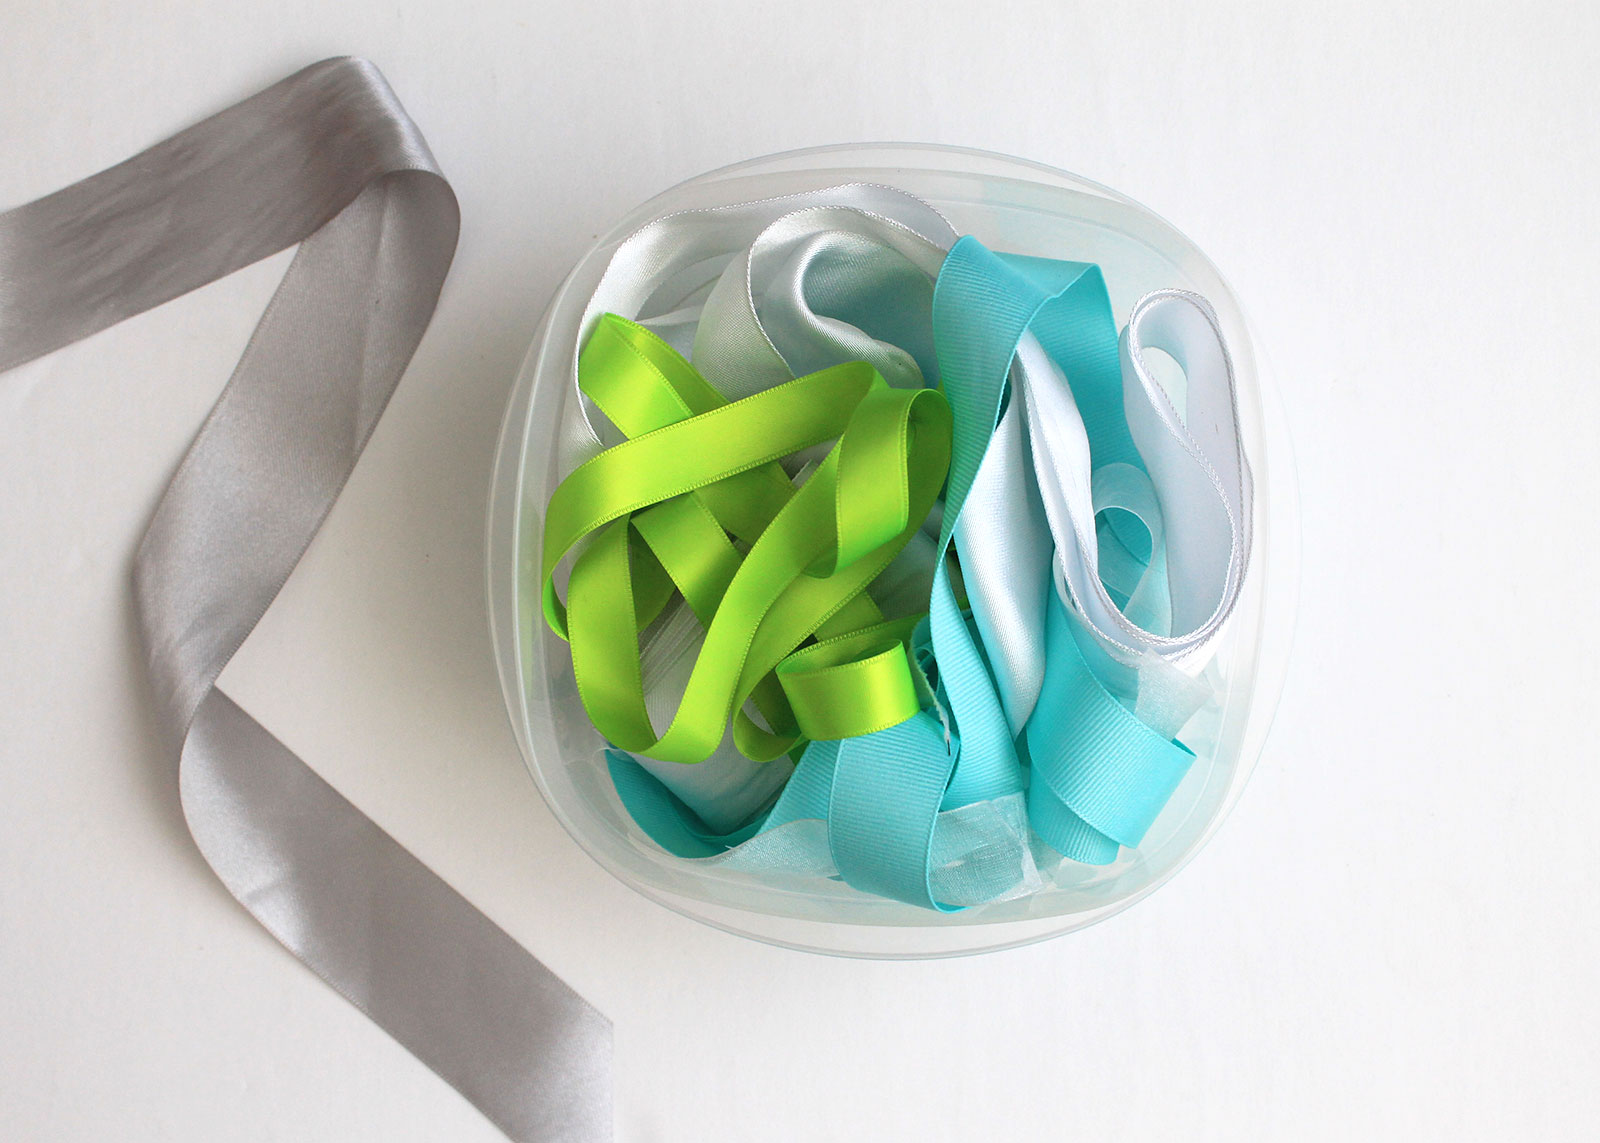 Repurpose plastic containers to store crafting supplies